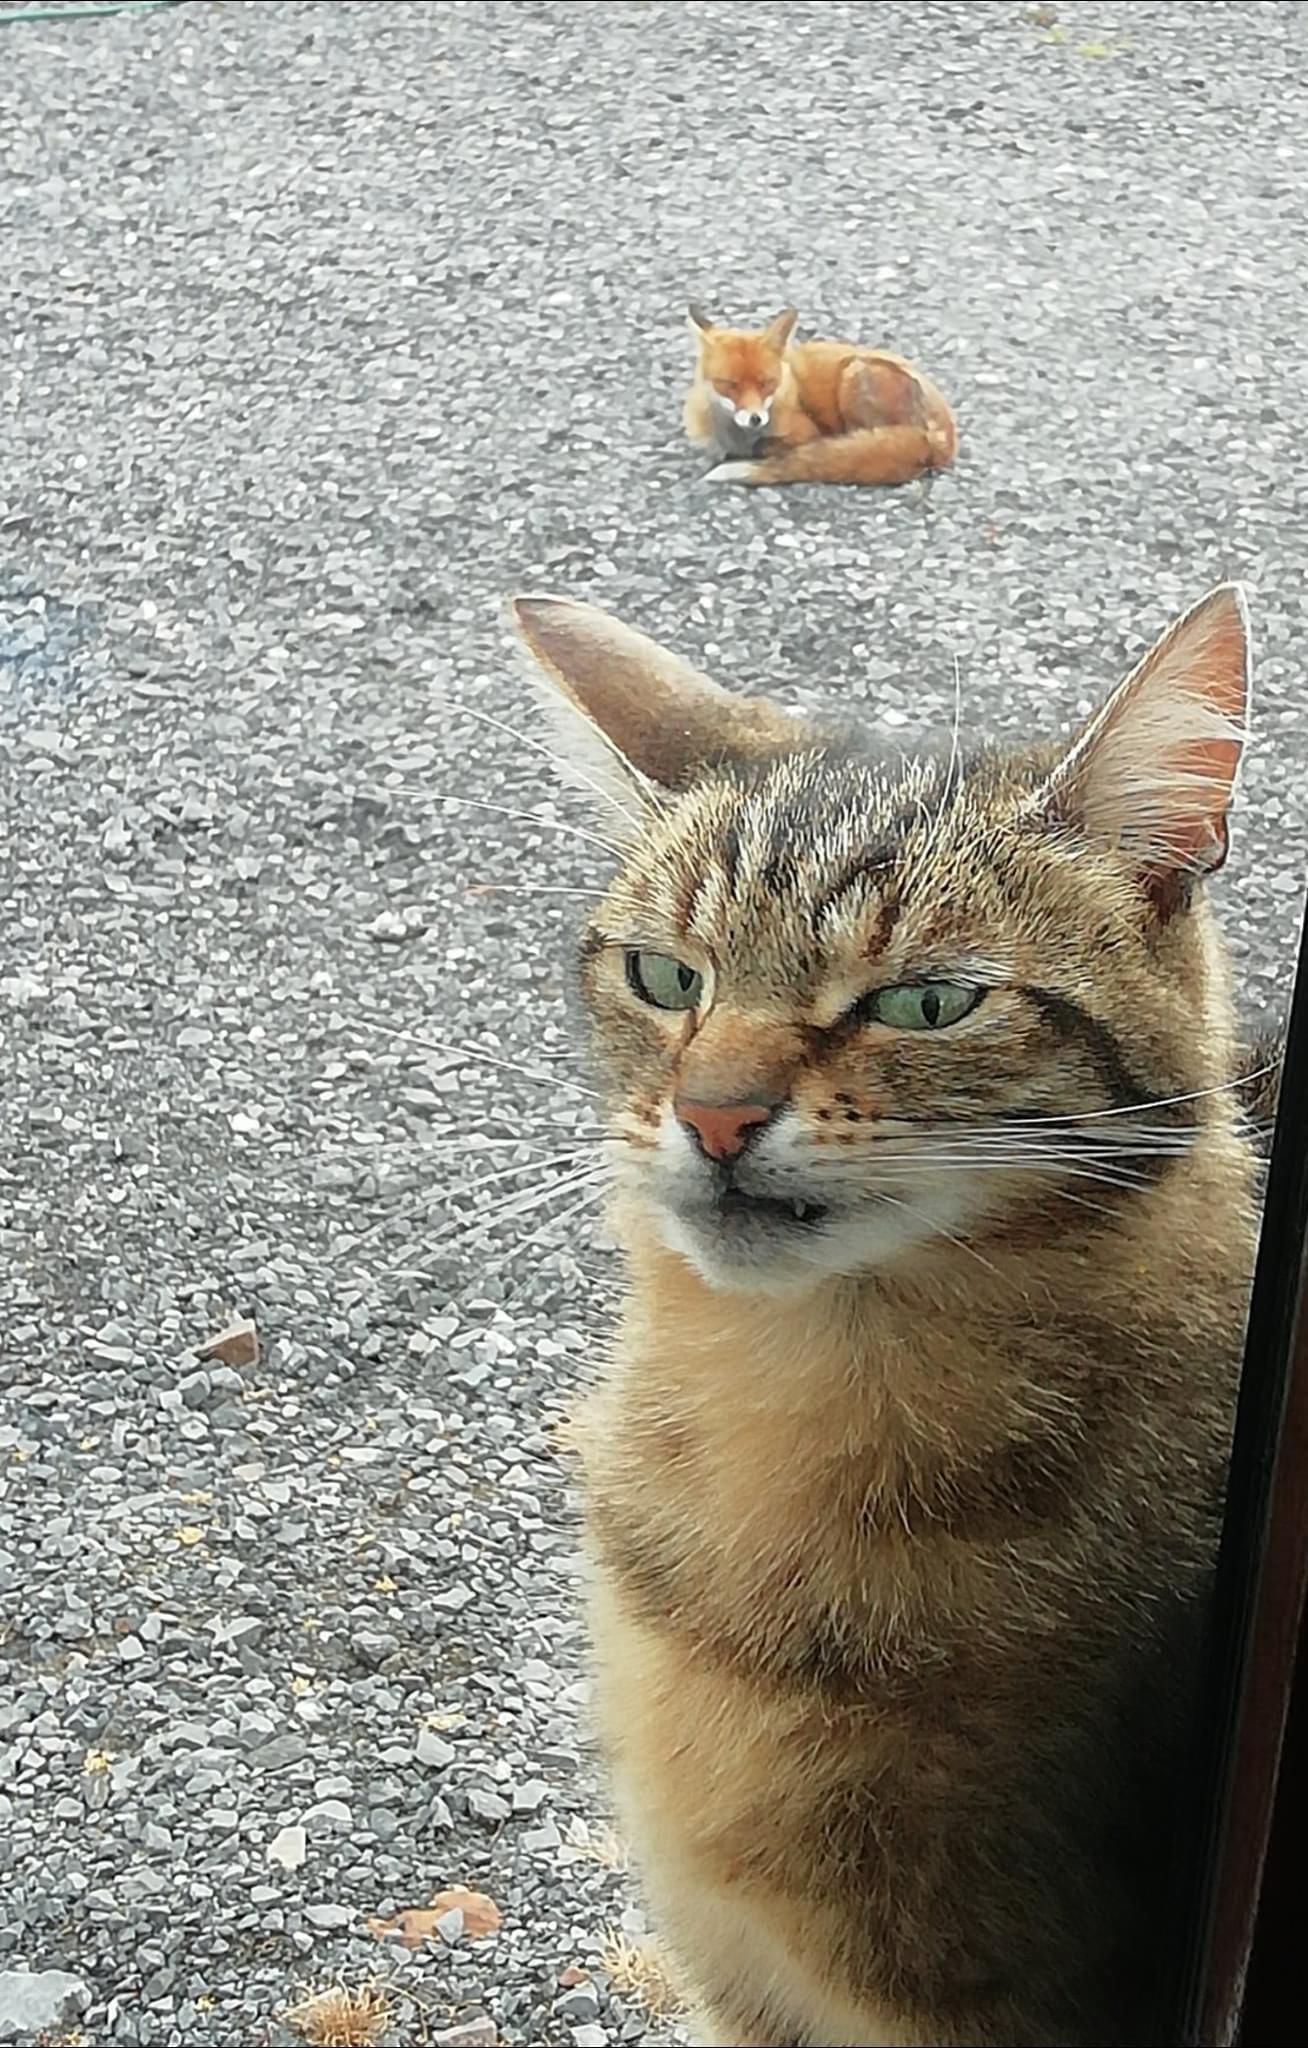 My cat was not impressed when a fox came by.